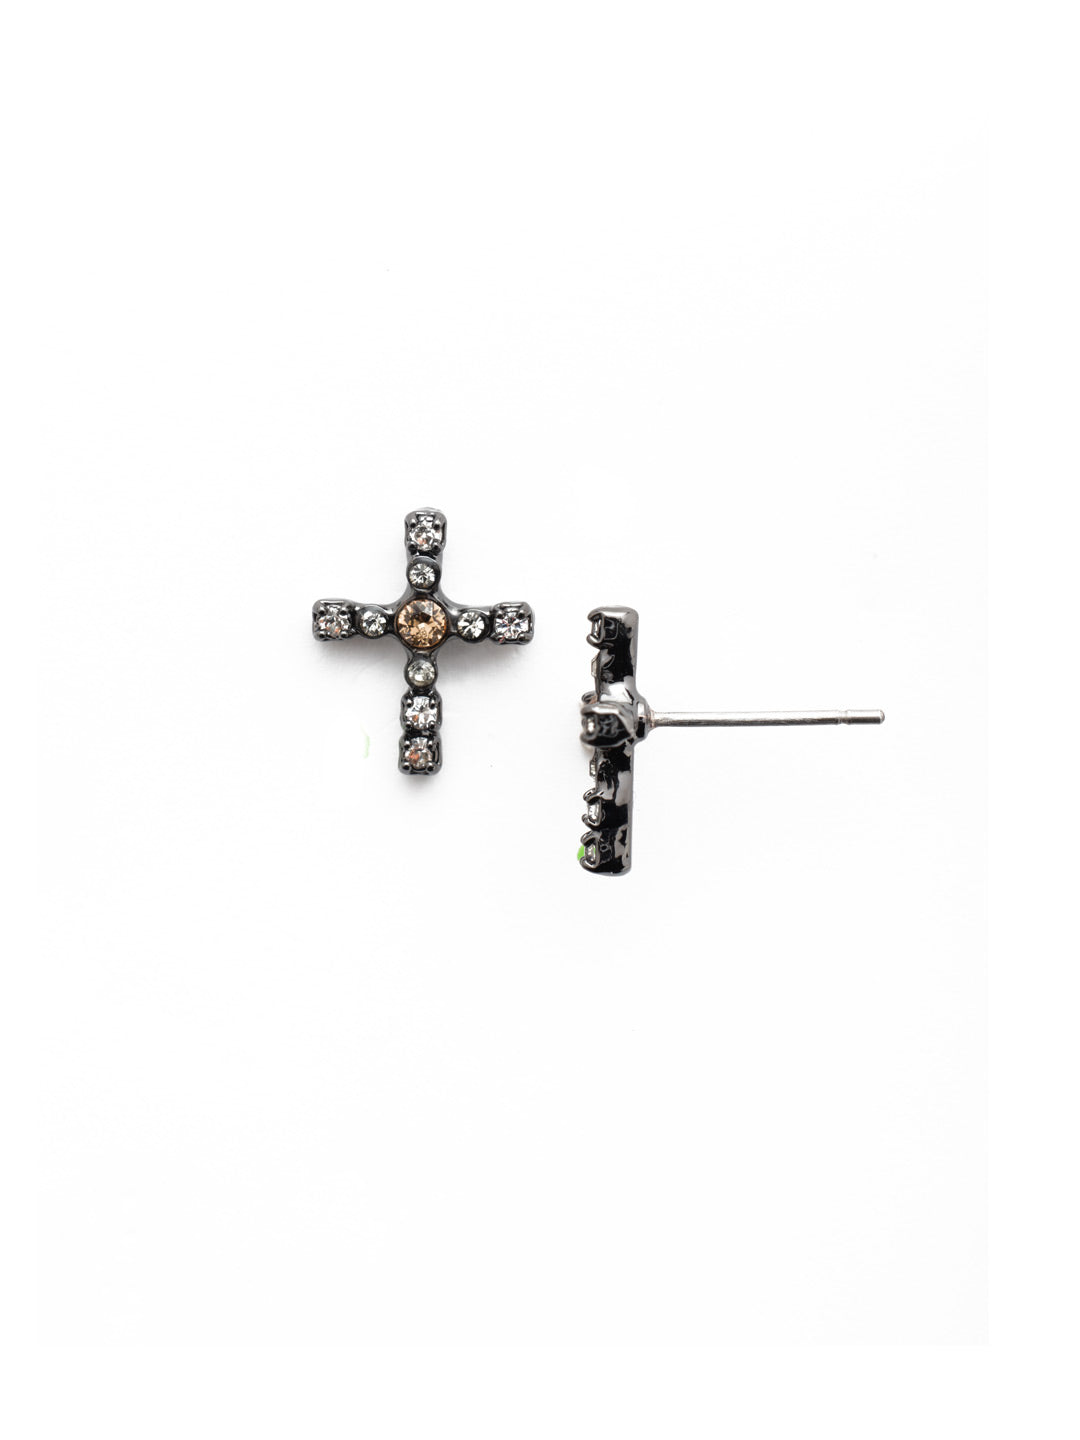 Miley Cross Stud Earring - EEN1GMGNS - The Miley Stud Earrings are the easy go-to pair for both cross and crystal-bling lovers. They feature both and are a win-win. From Sorrelli's Golden Shadow collection in our Gun Metal finish.